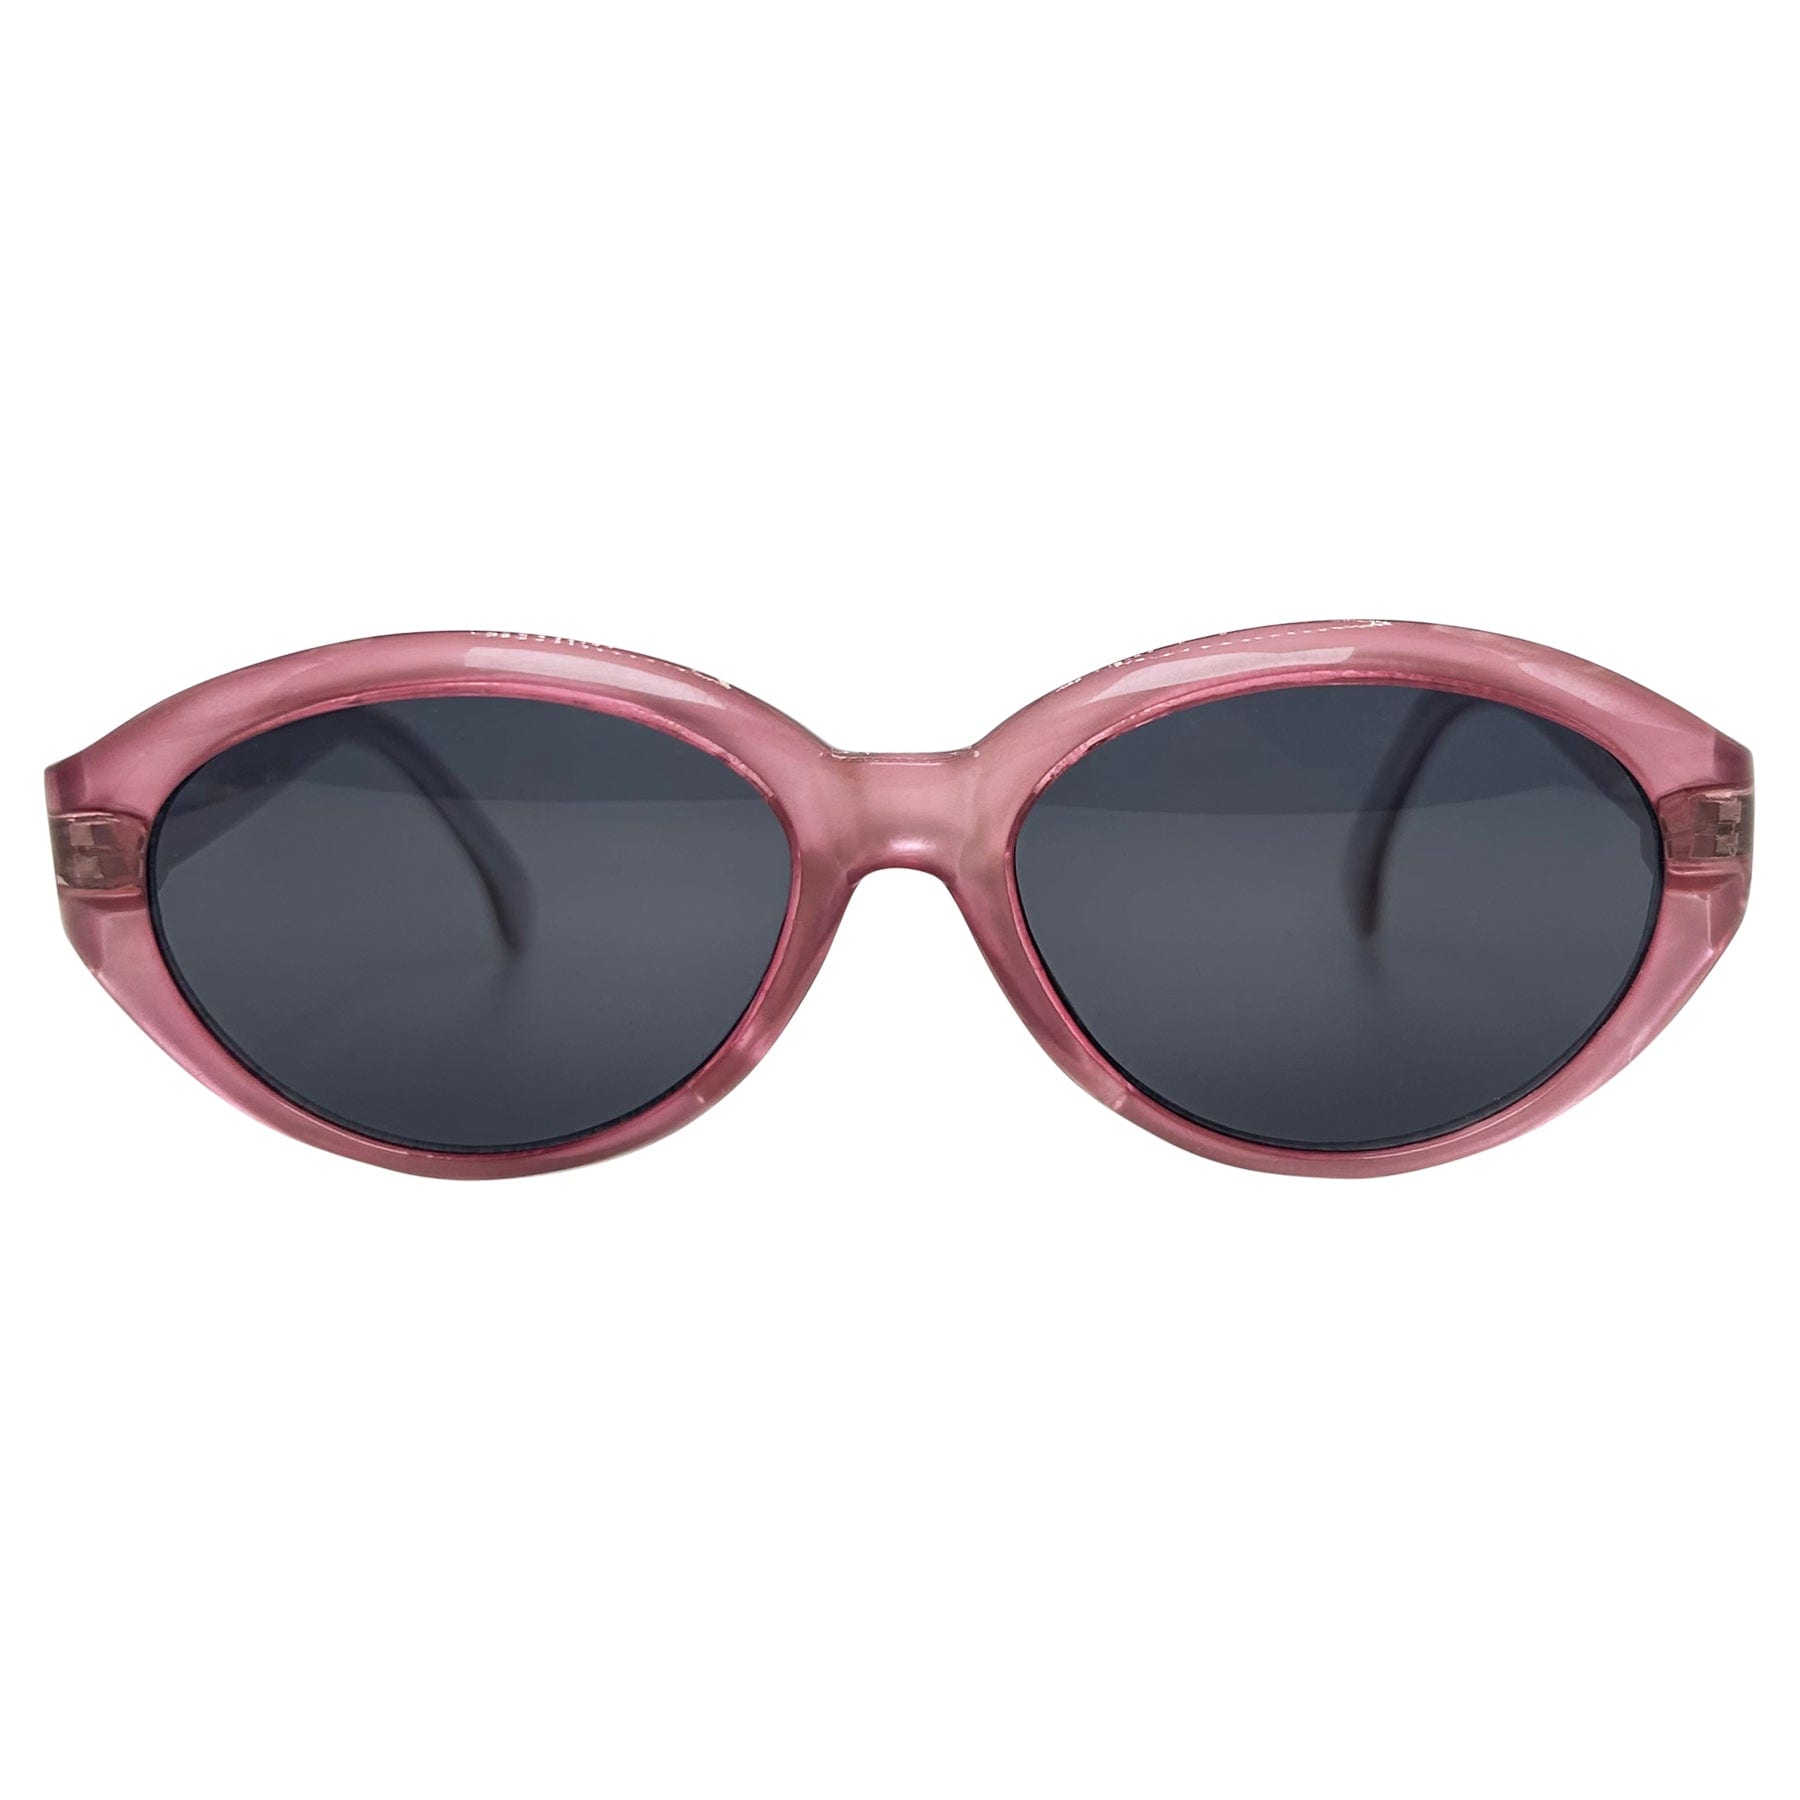 pink cat eye 90s sunglasses with a super dark lens